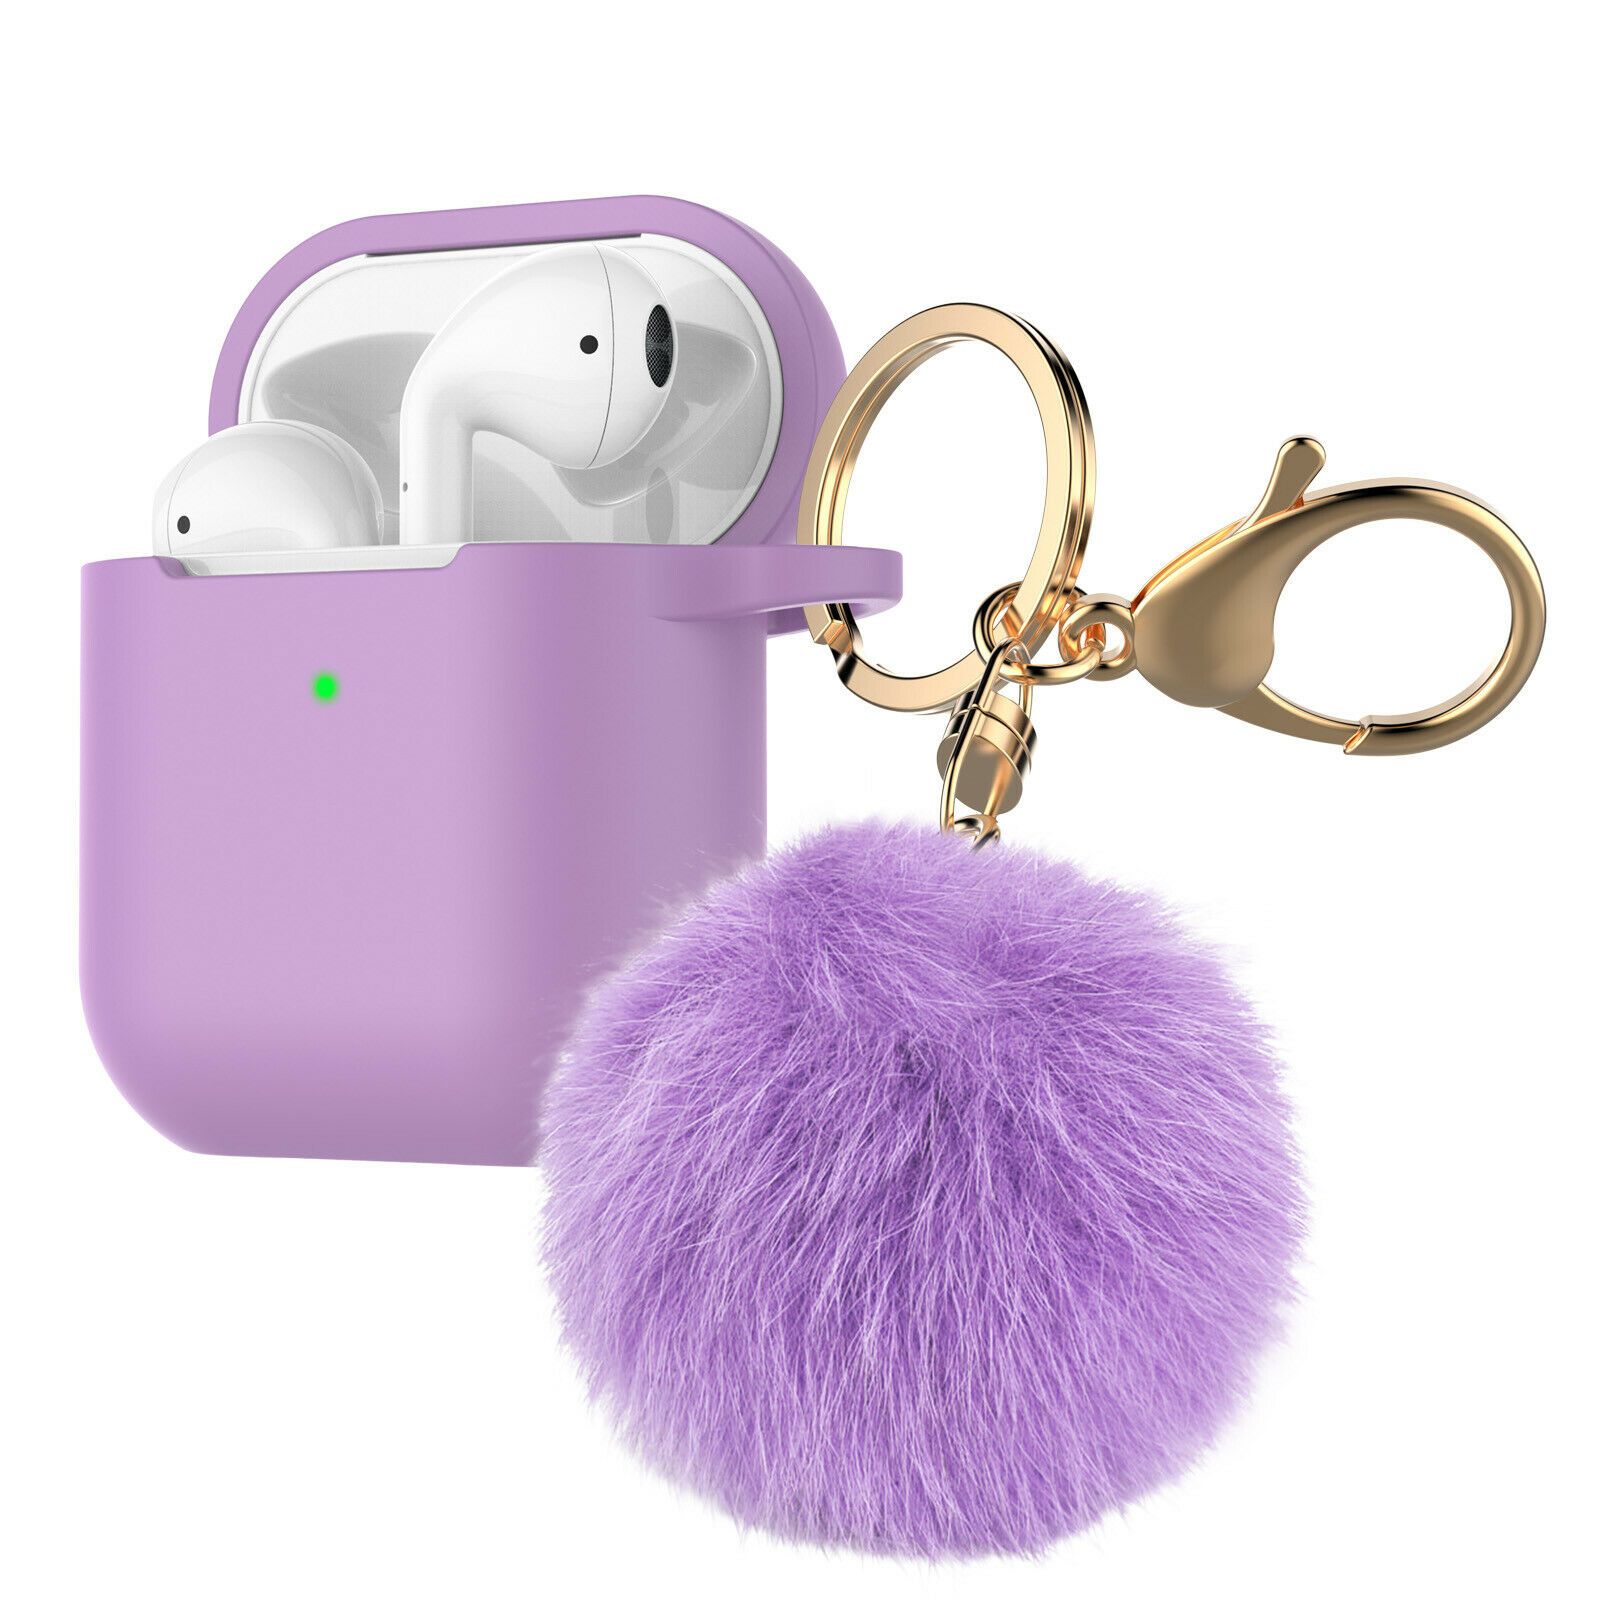 Airpods Silicone Charging Case Cover Fur Ball Keychain For Apple AirPods 1/2 Airpods Case hellotecusa Purple 